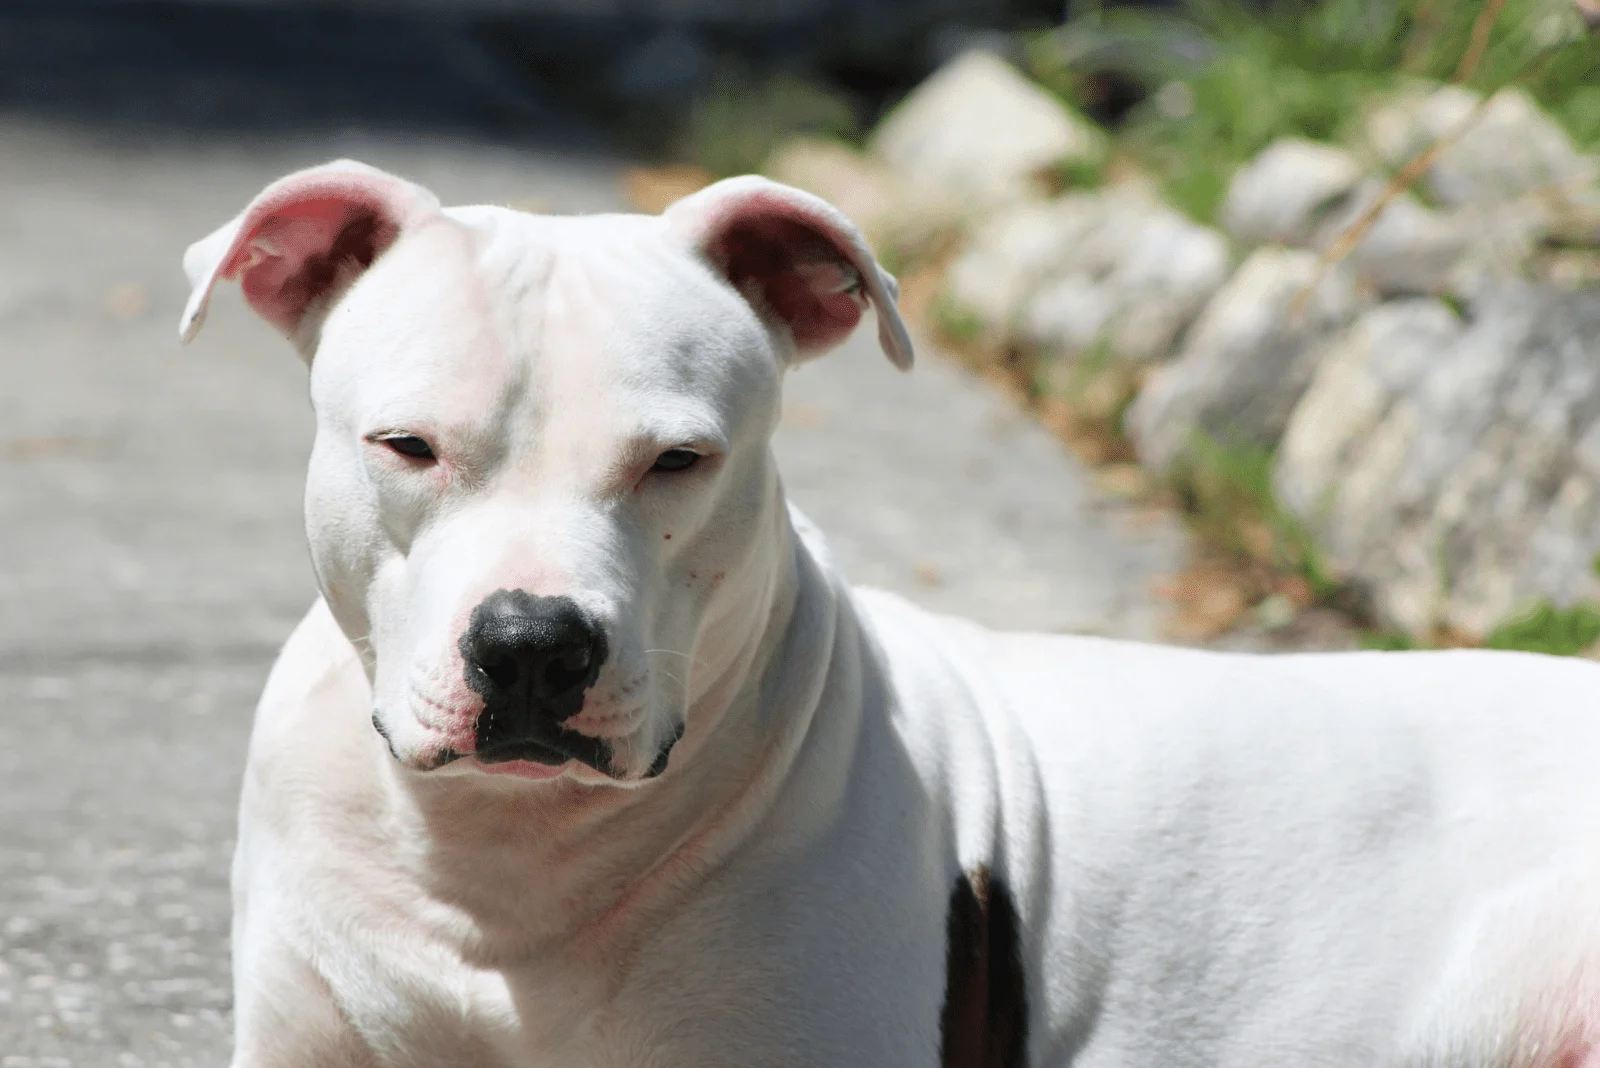 Dogo Argentino Pitbull Mix is looking at the camera